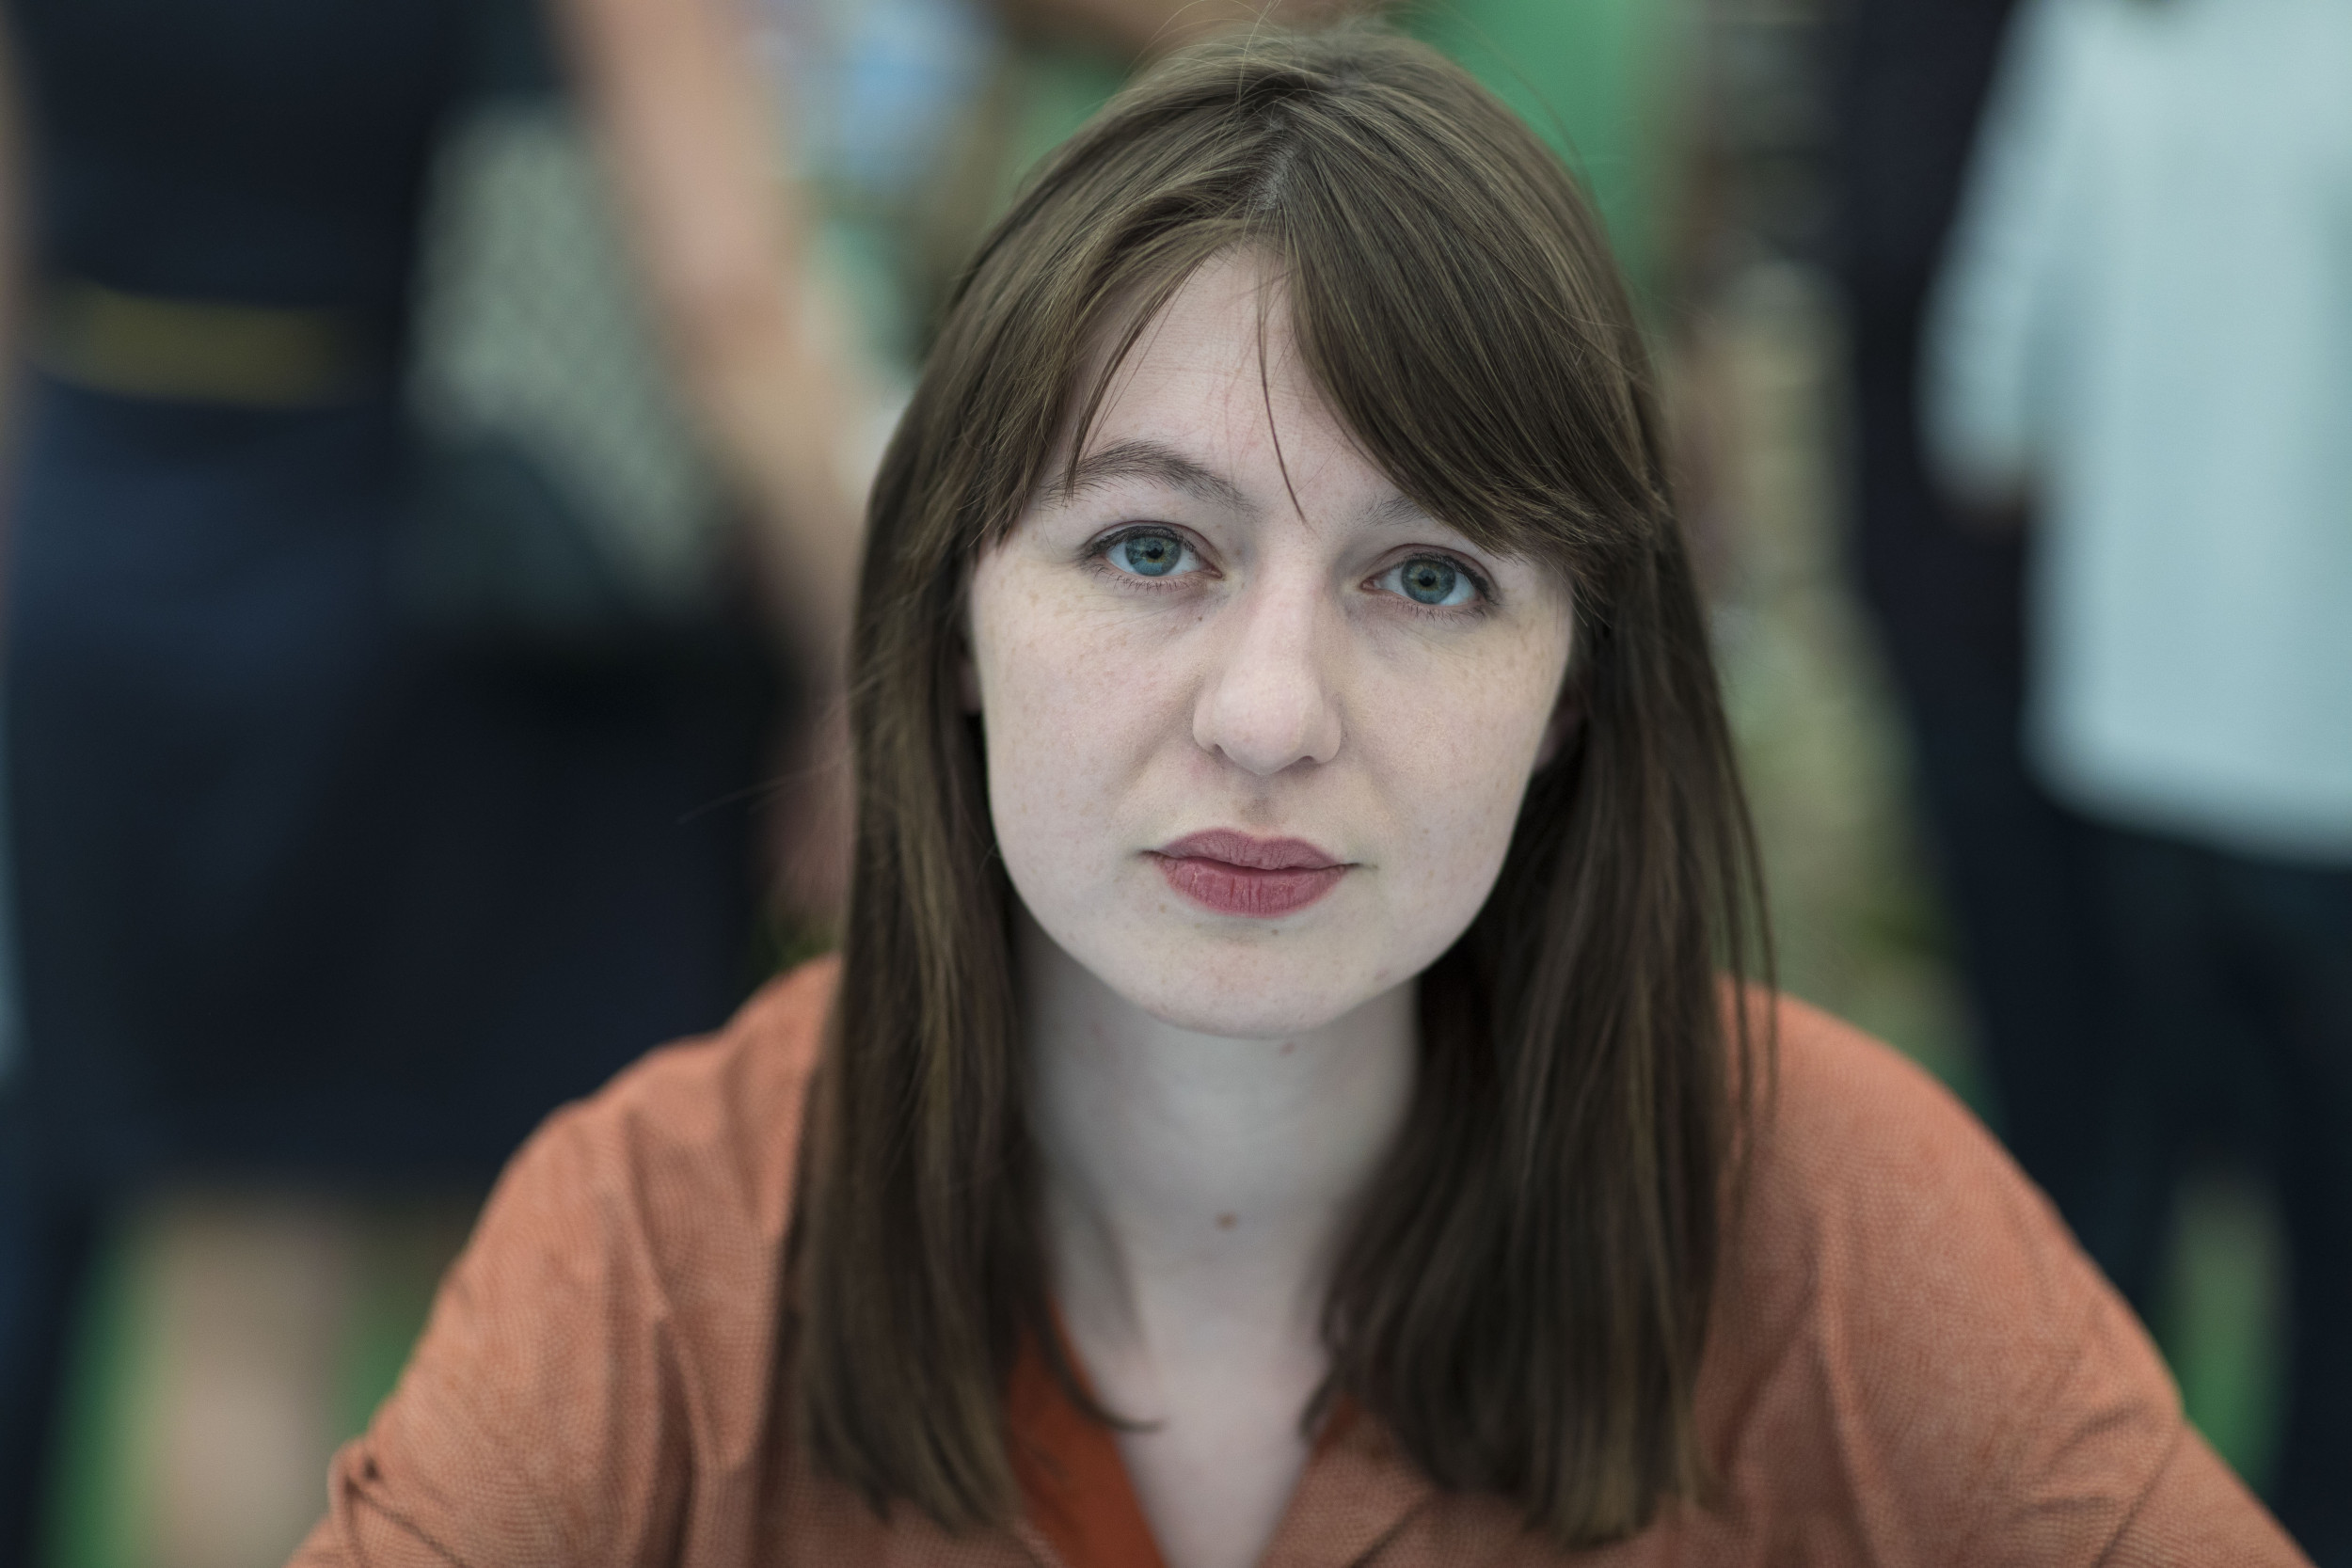 Sally Rooney Explains Why Shes Boycotting Israel And Not Other Nations